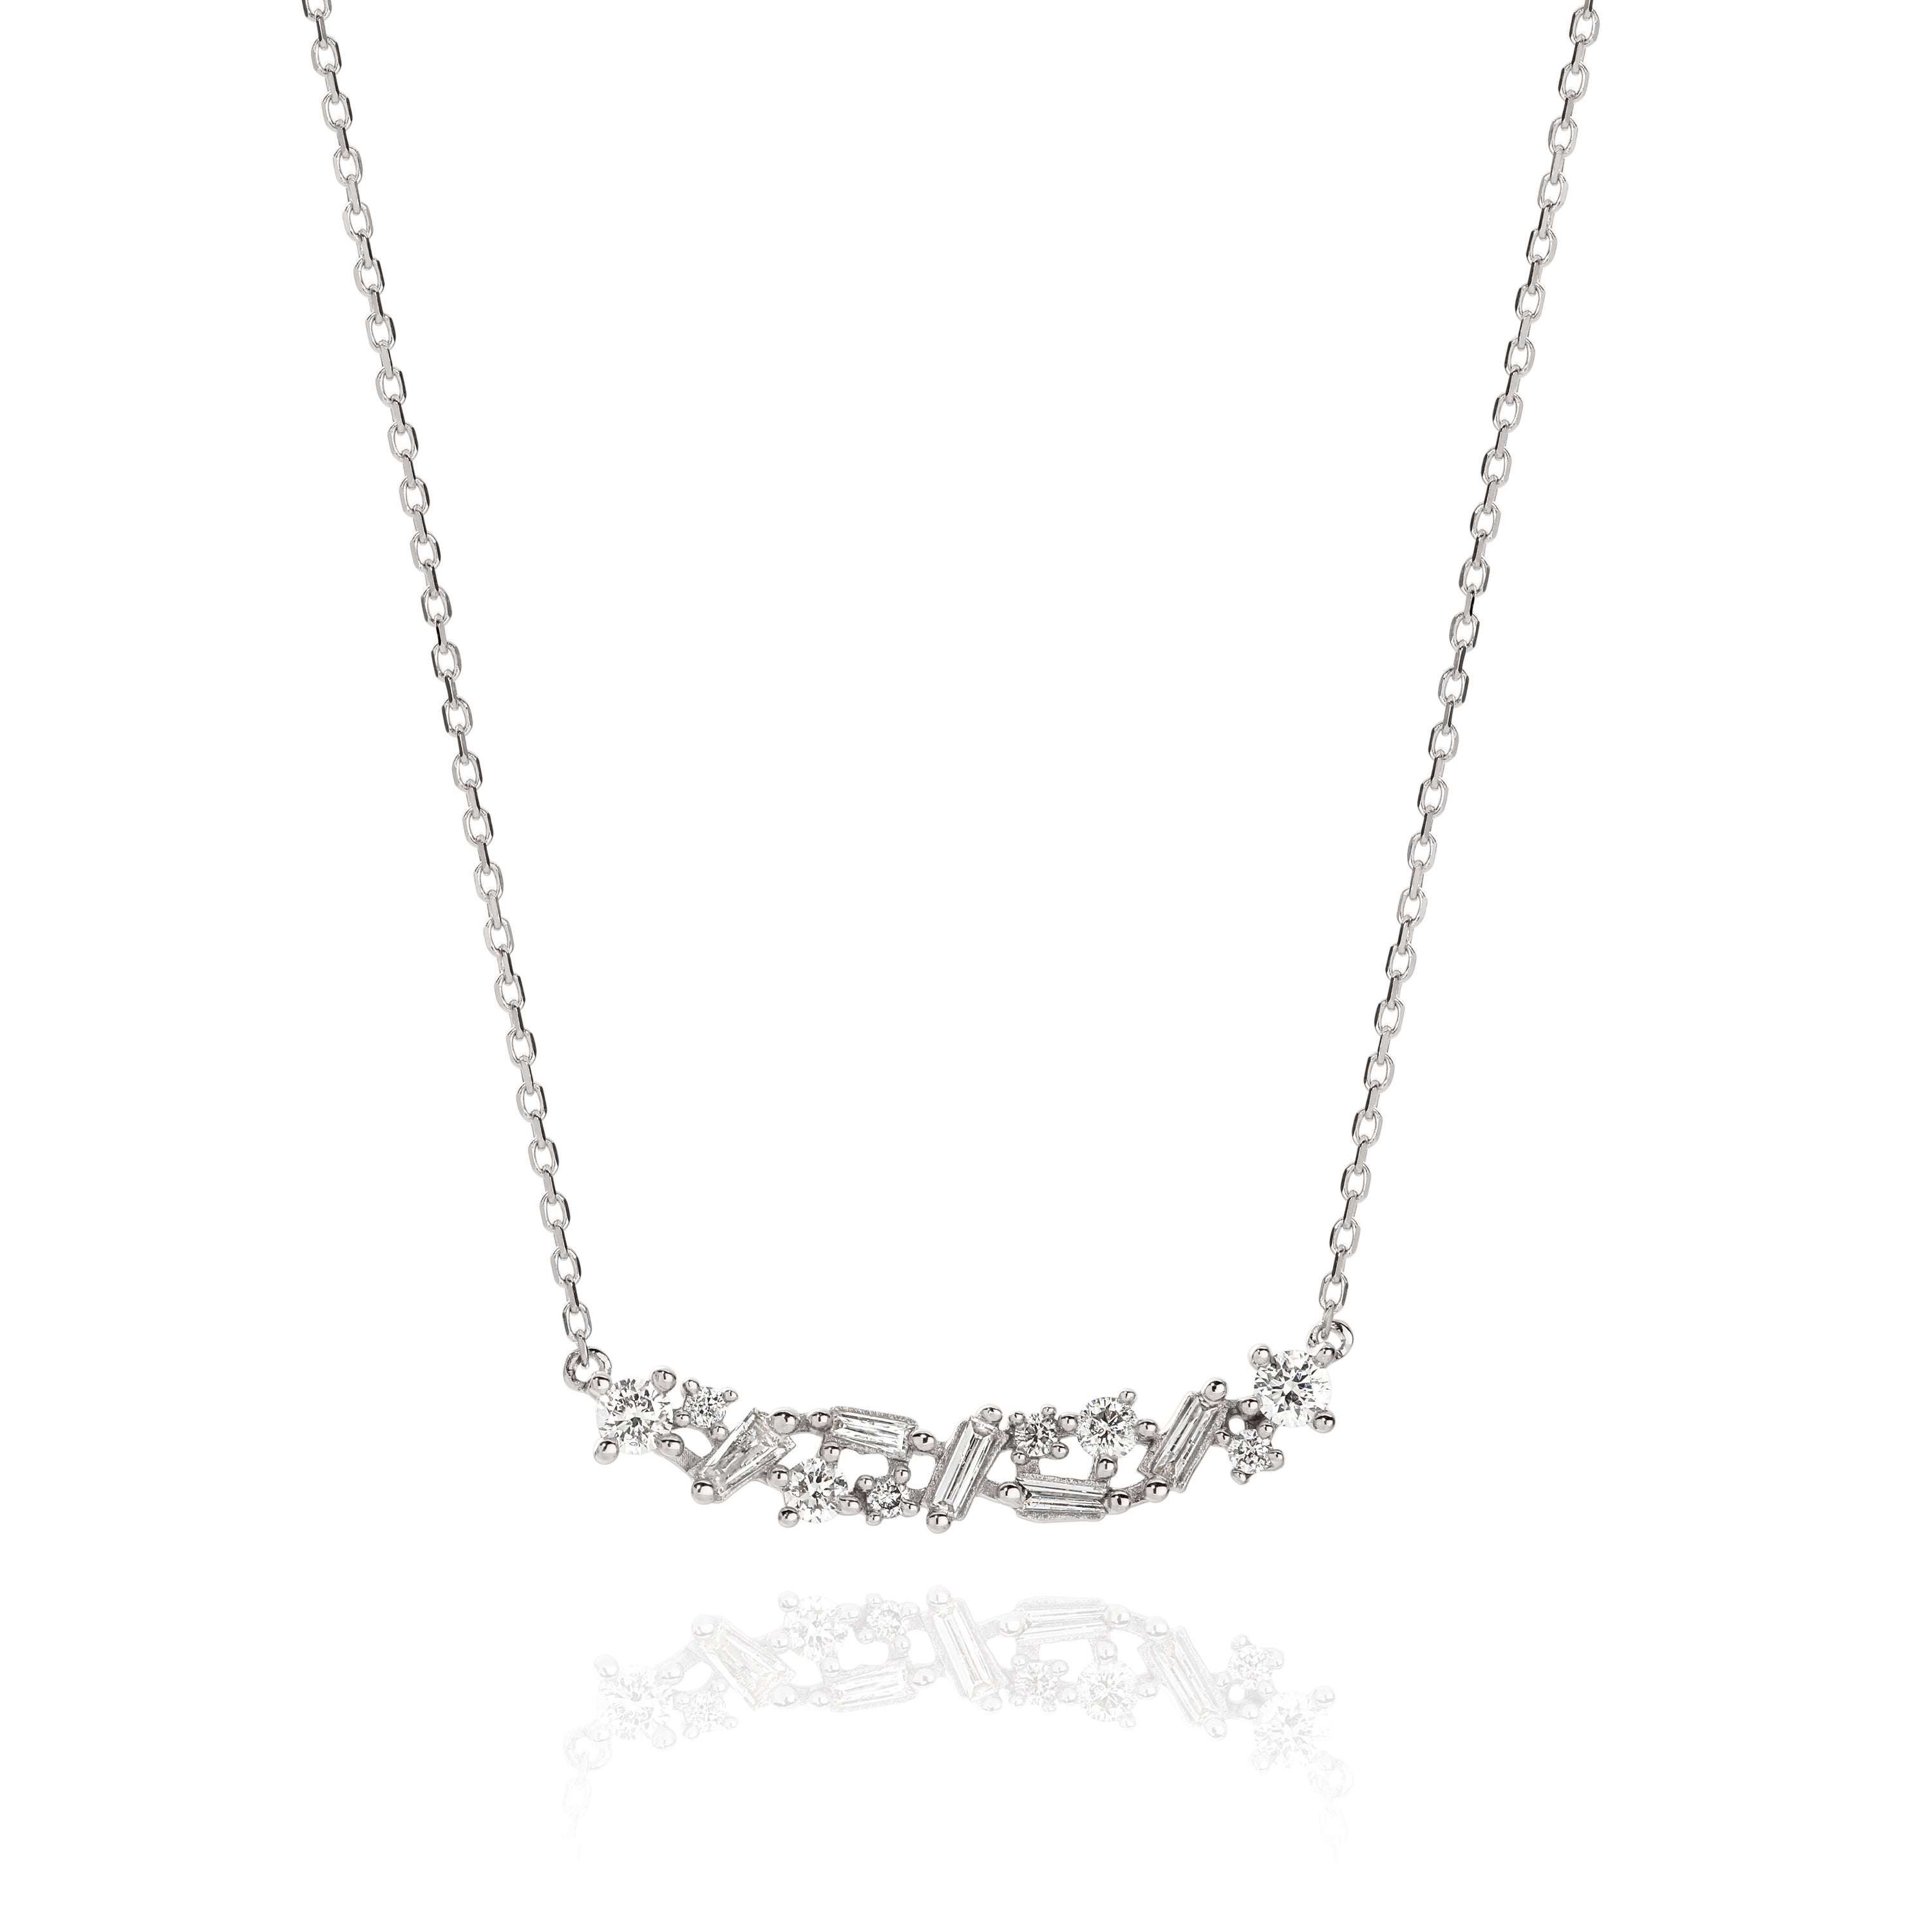 9ct White Gold Diamond Claw Scatter Necklet